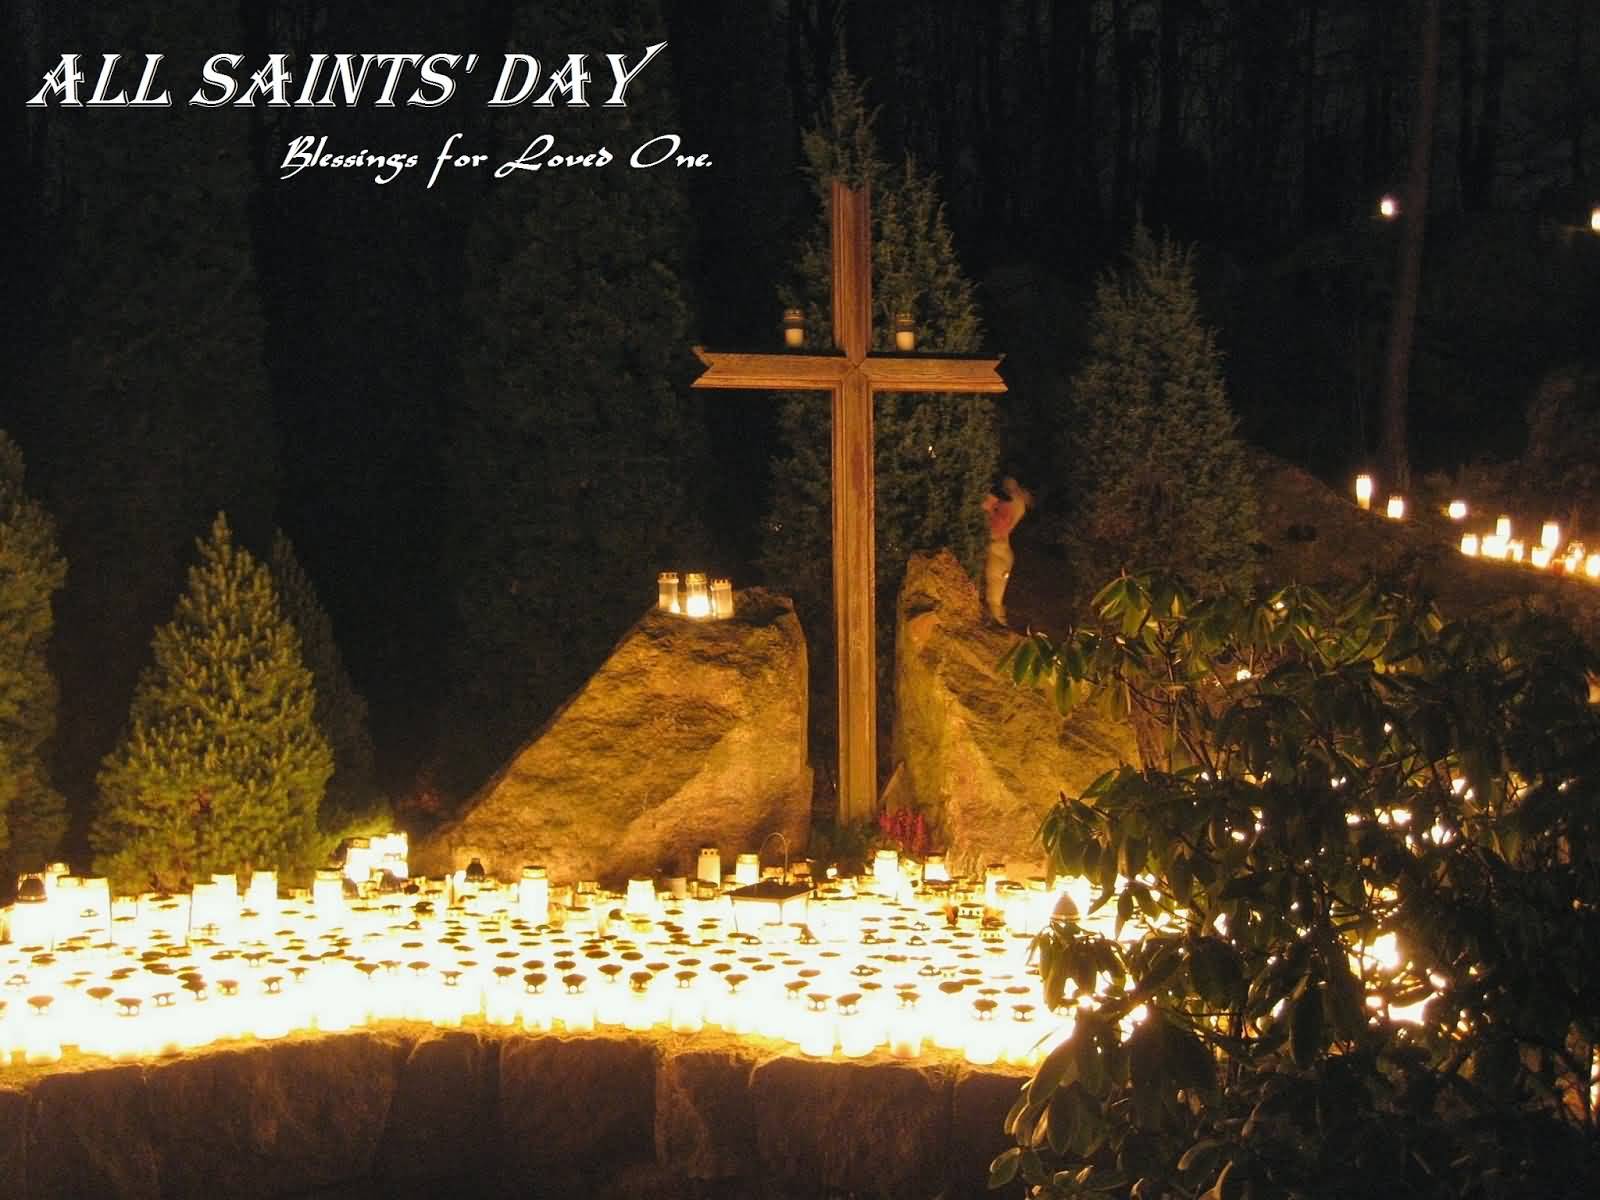 All Saints Day blessing for loved ones